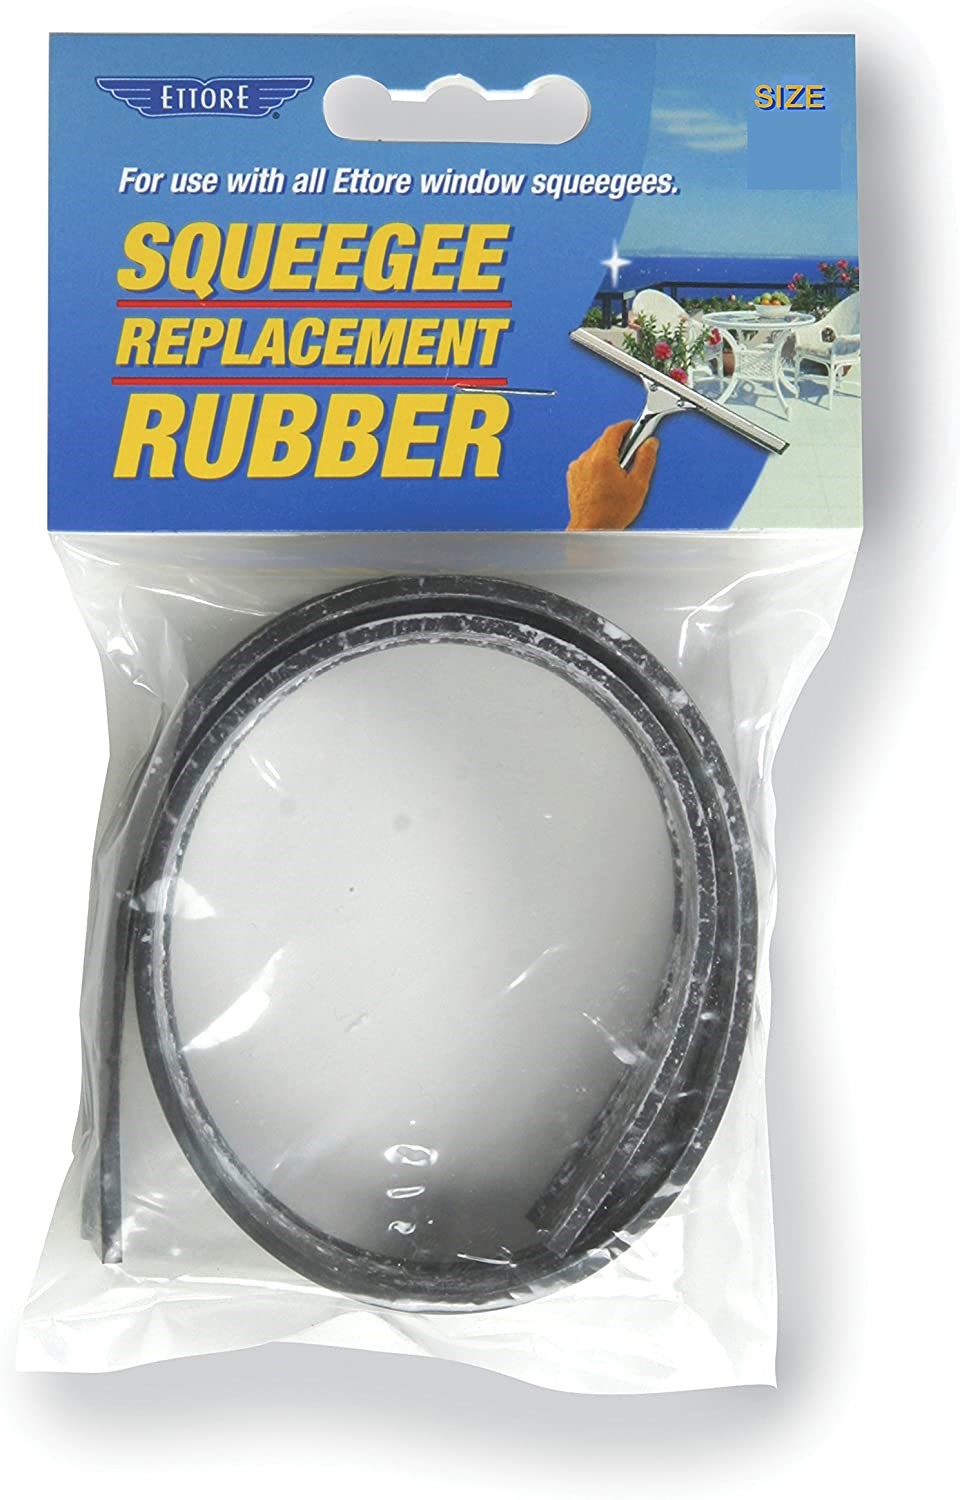 ET REPLACEMENT SQUEEGEE RUBBER 12